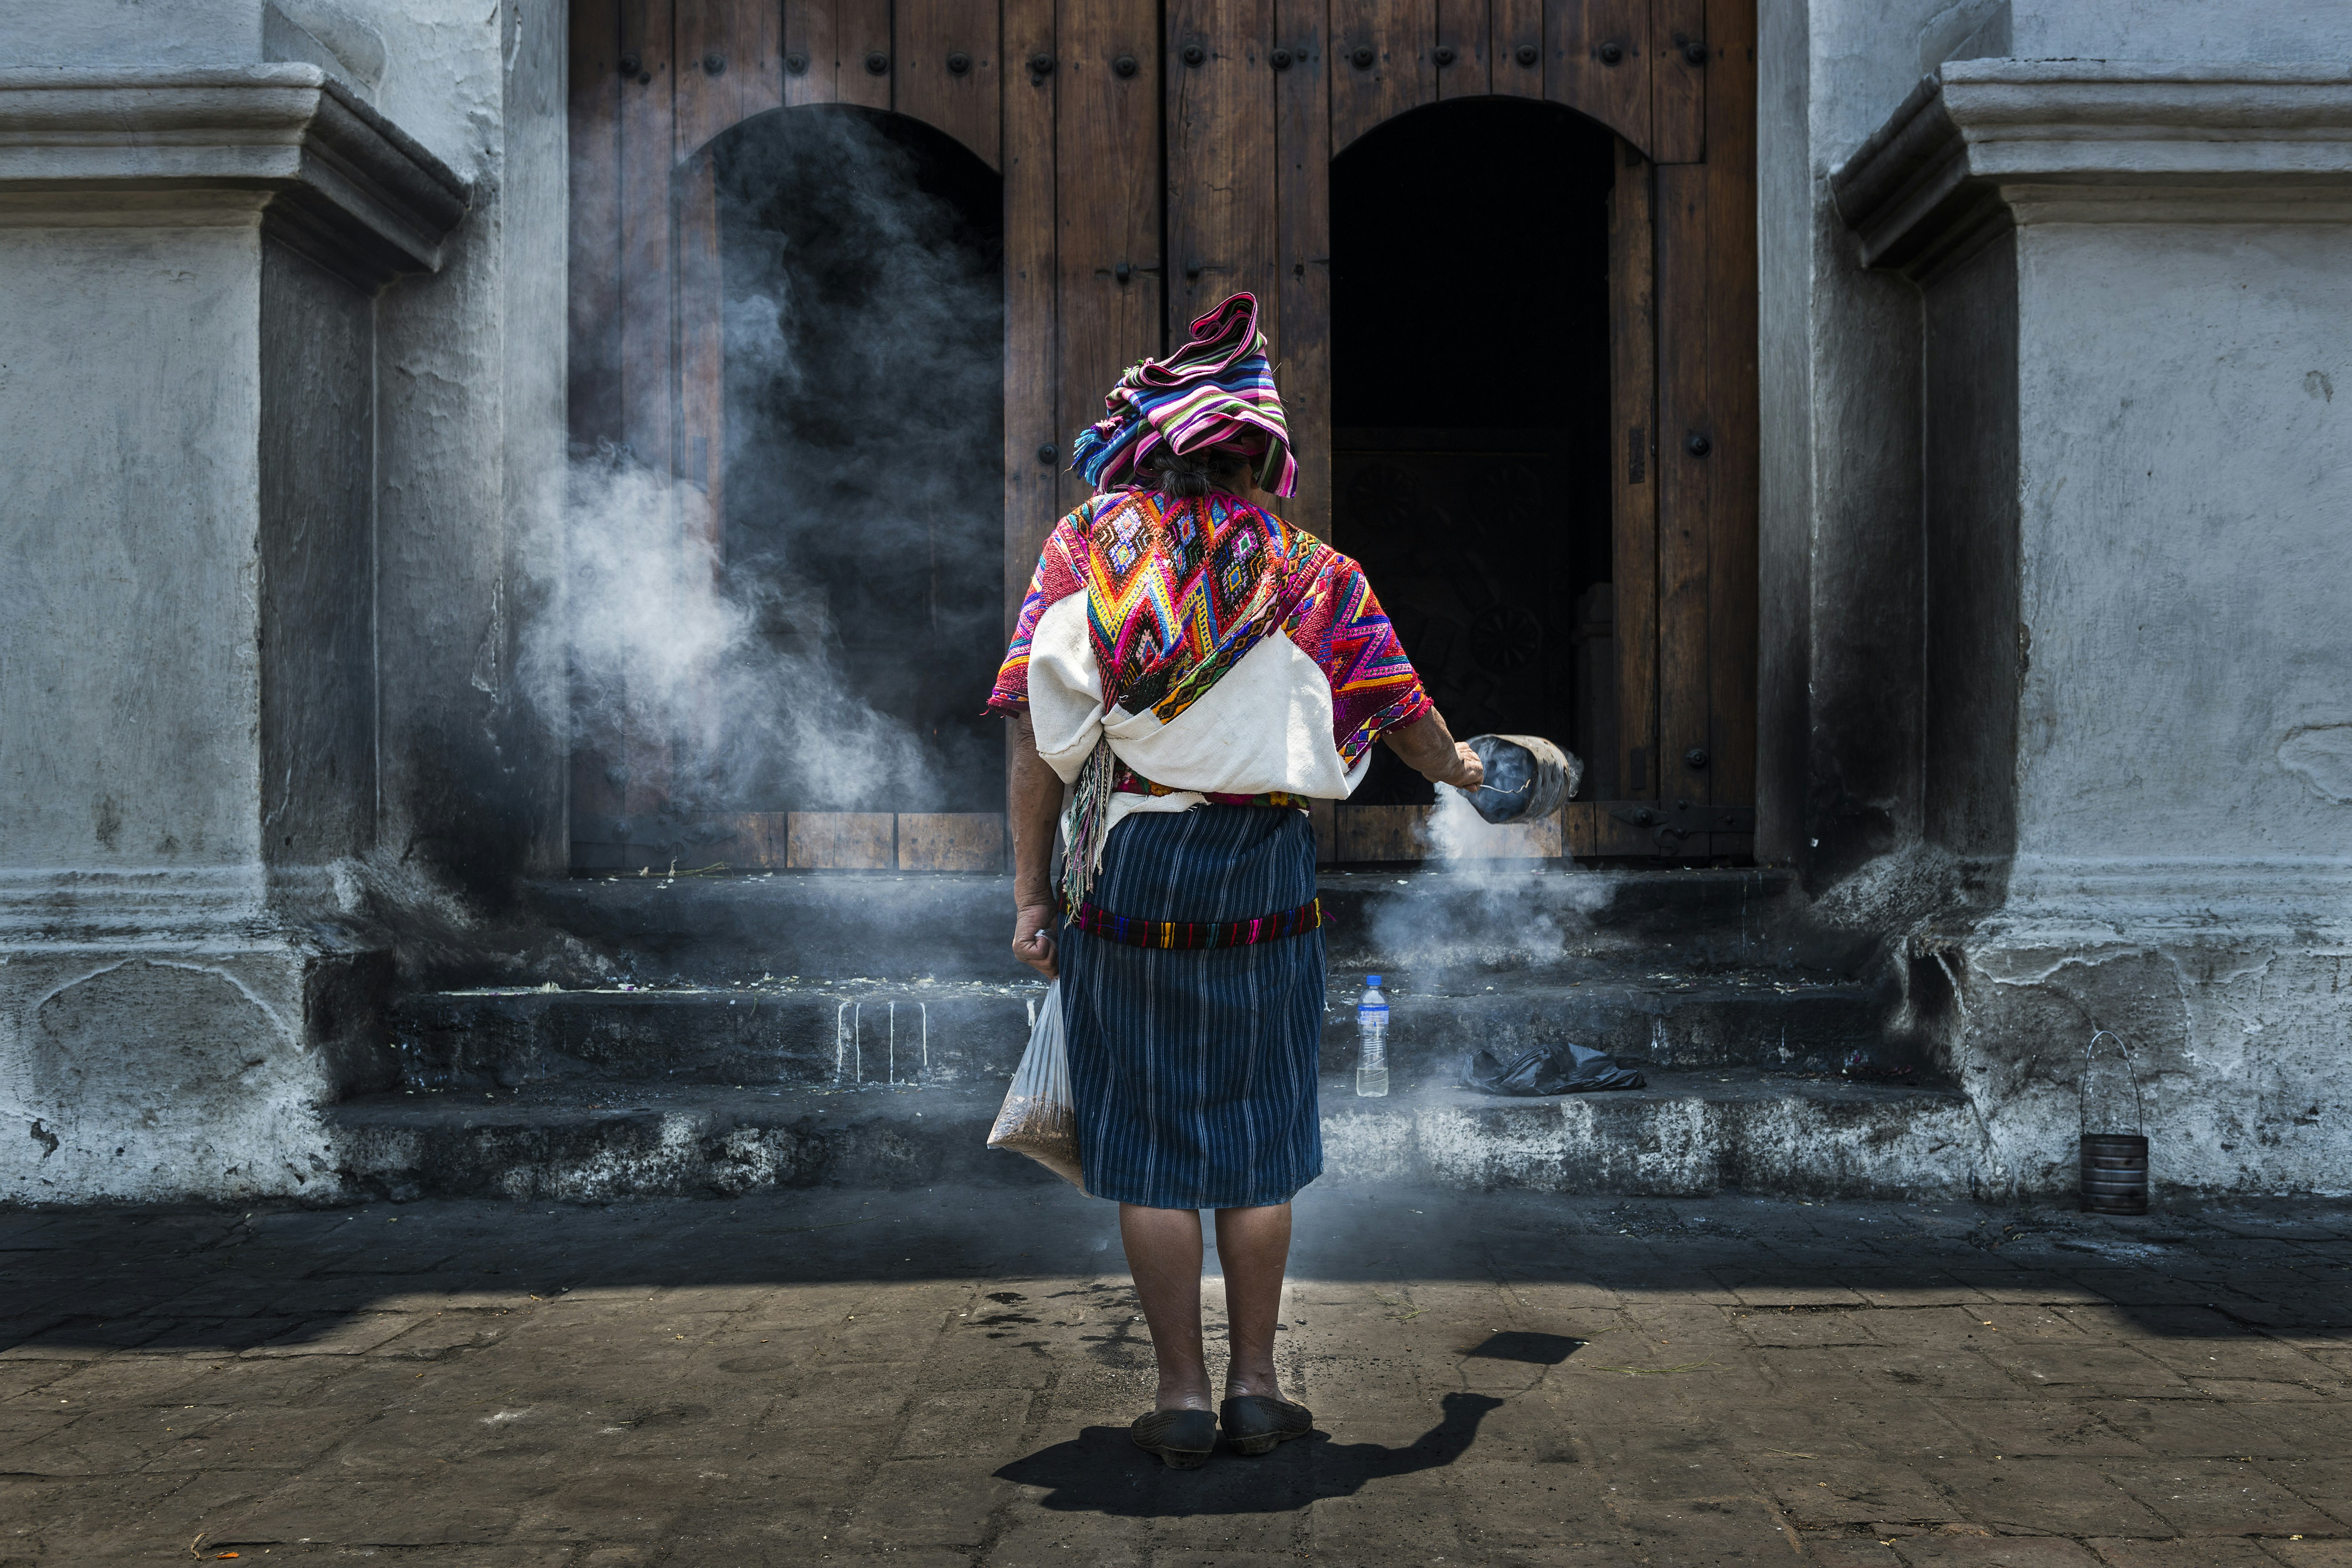 A woman dressed in a colorful Maya clothing waves a bucket filled smoke in front of Santo Tomás church in the town of Chichicastenango, in Guatemala 